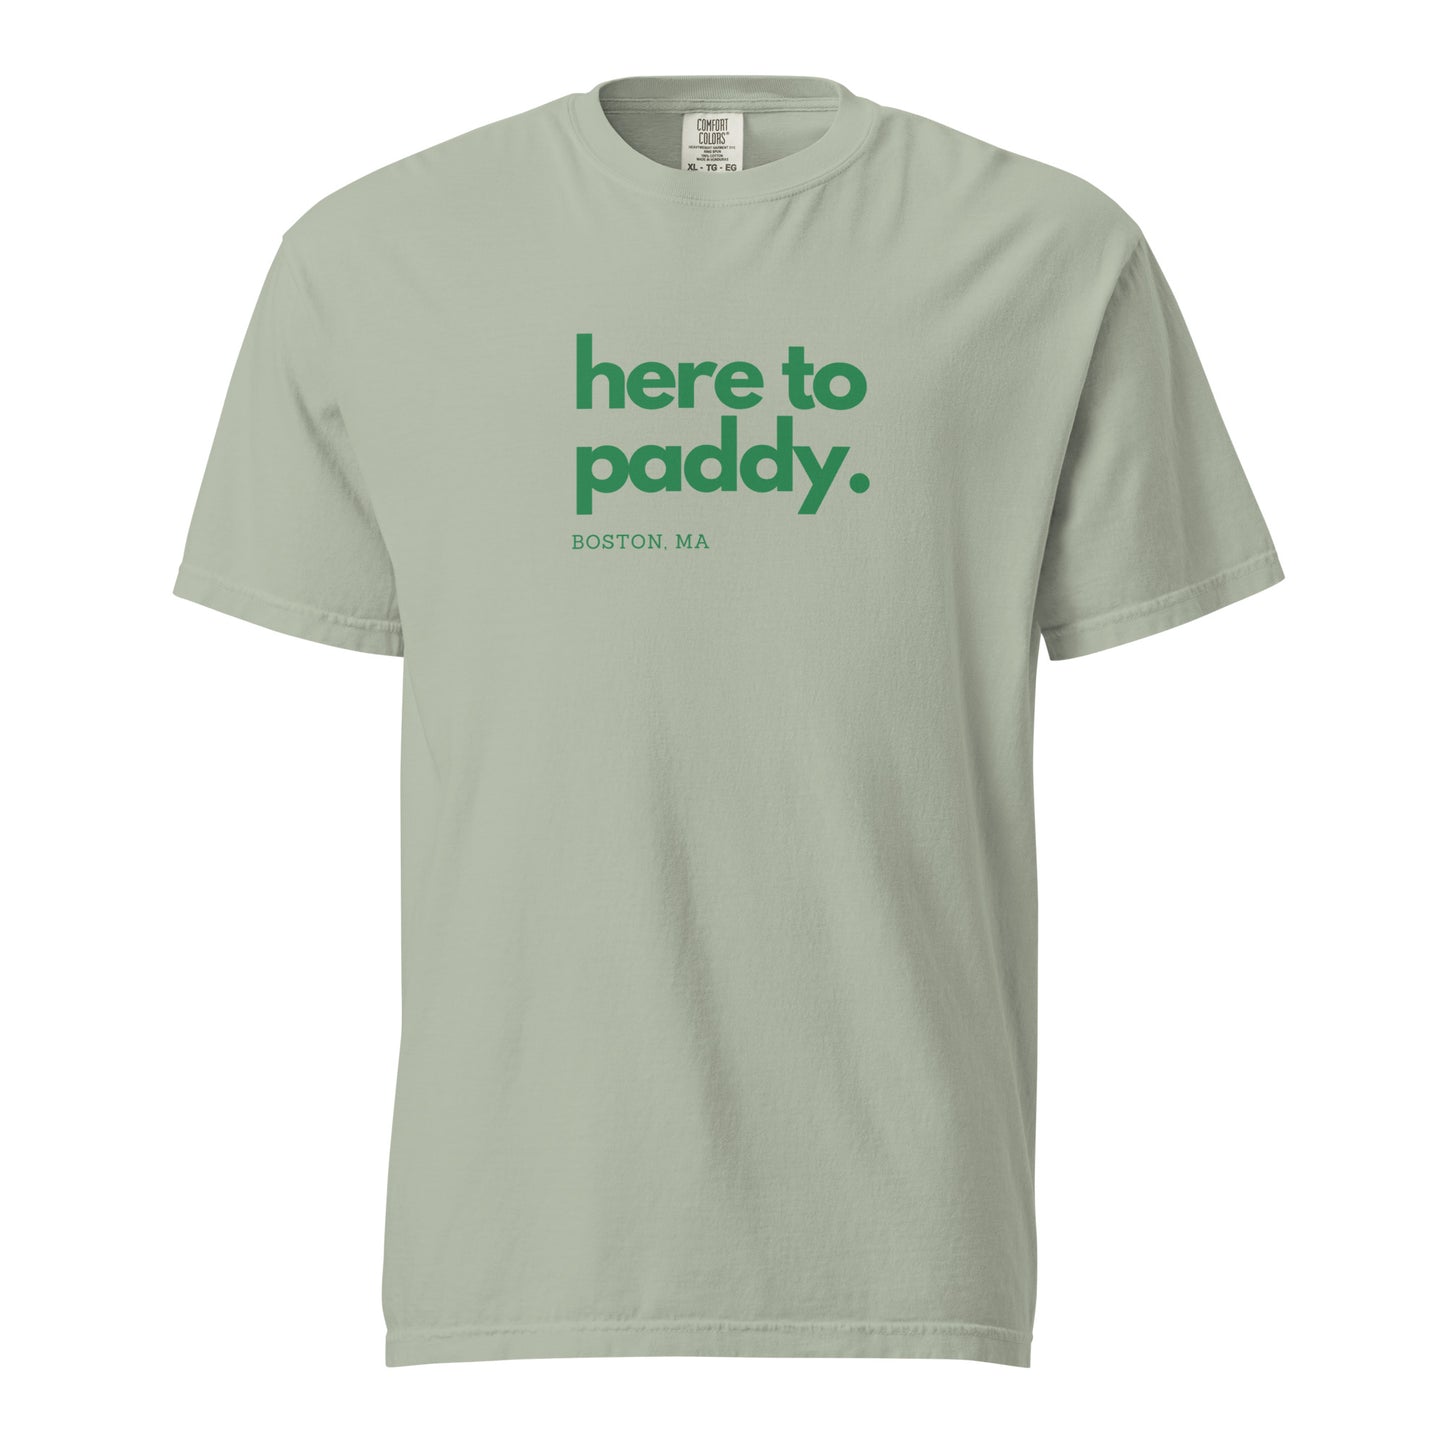 Here to paddy t-shirt